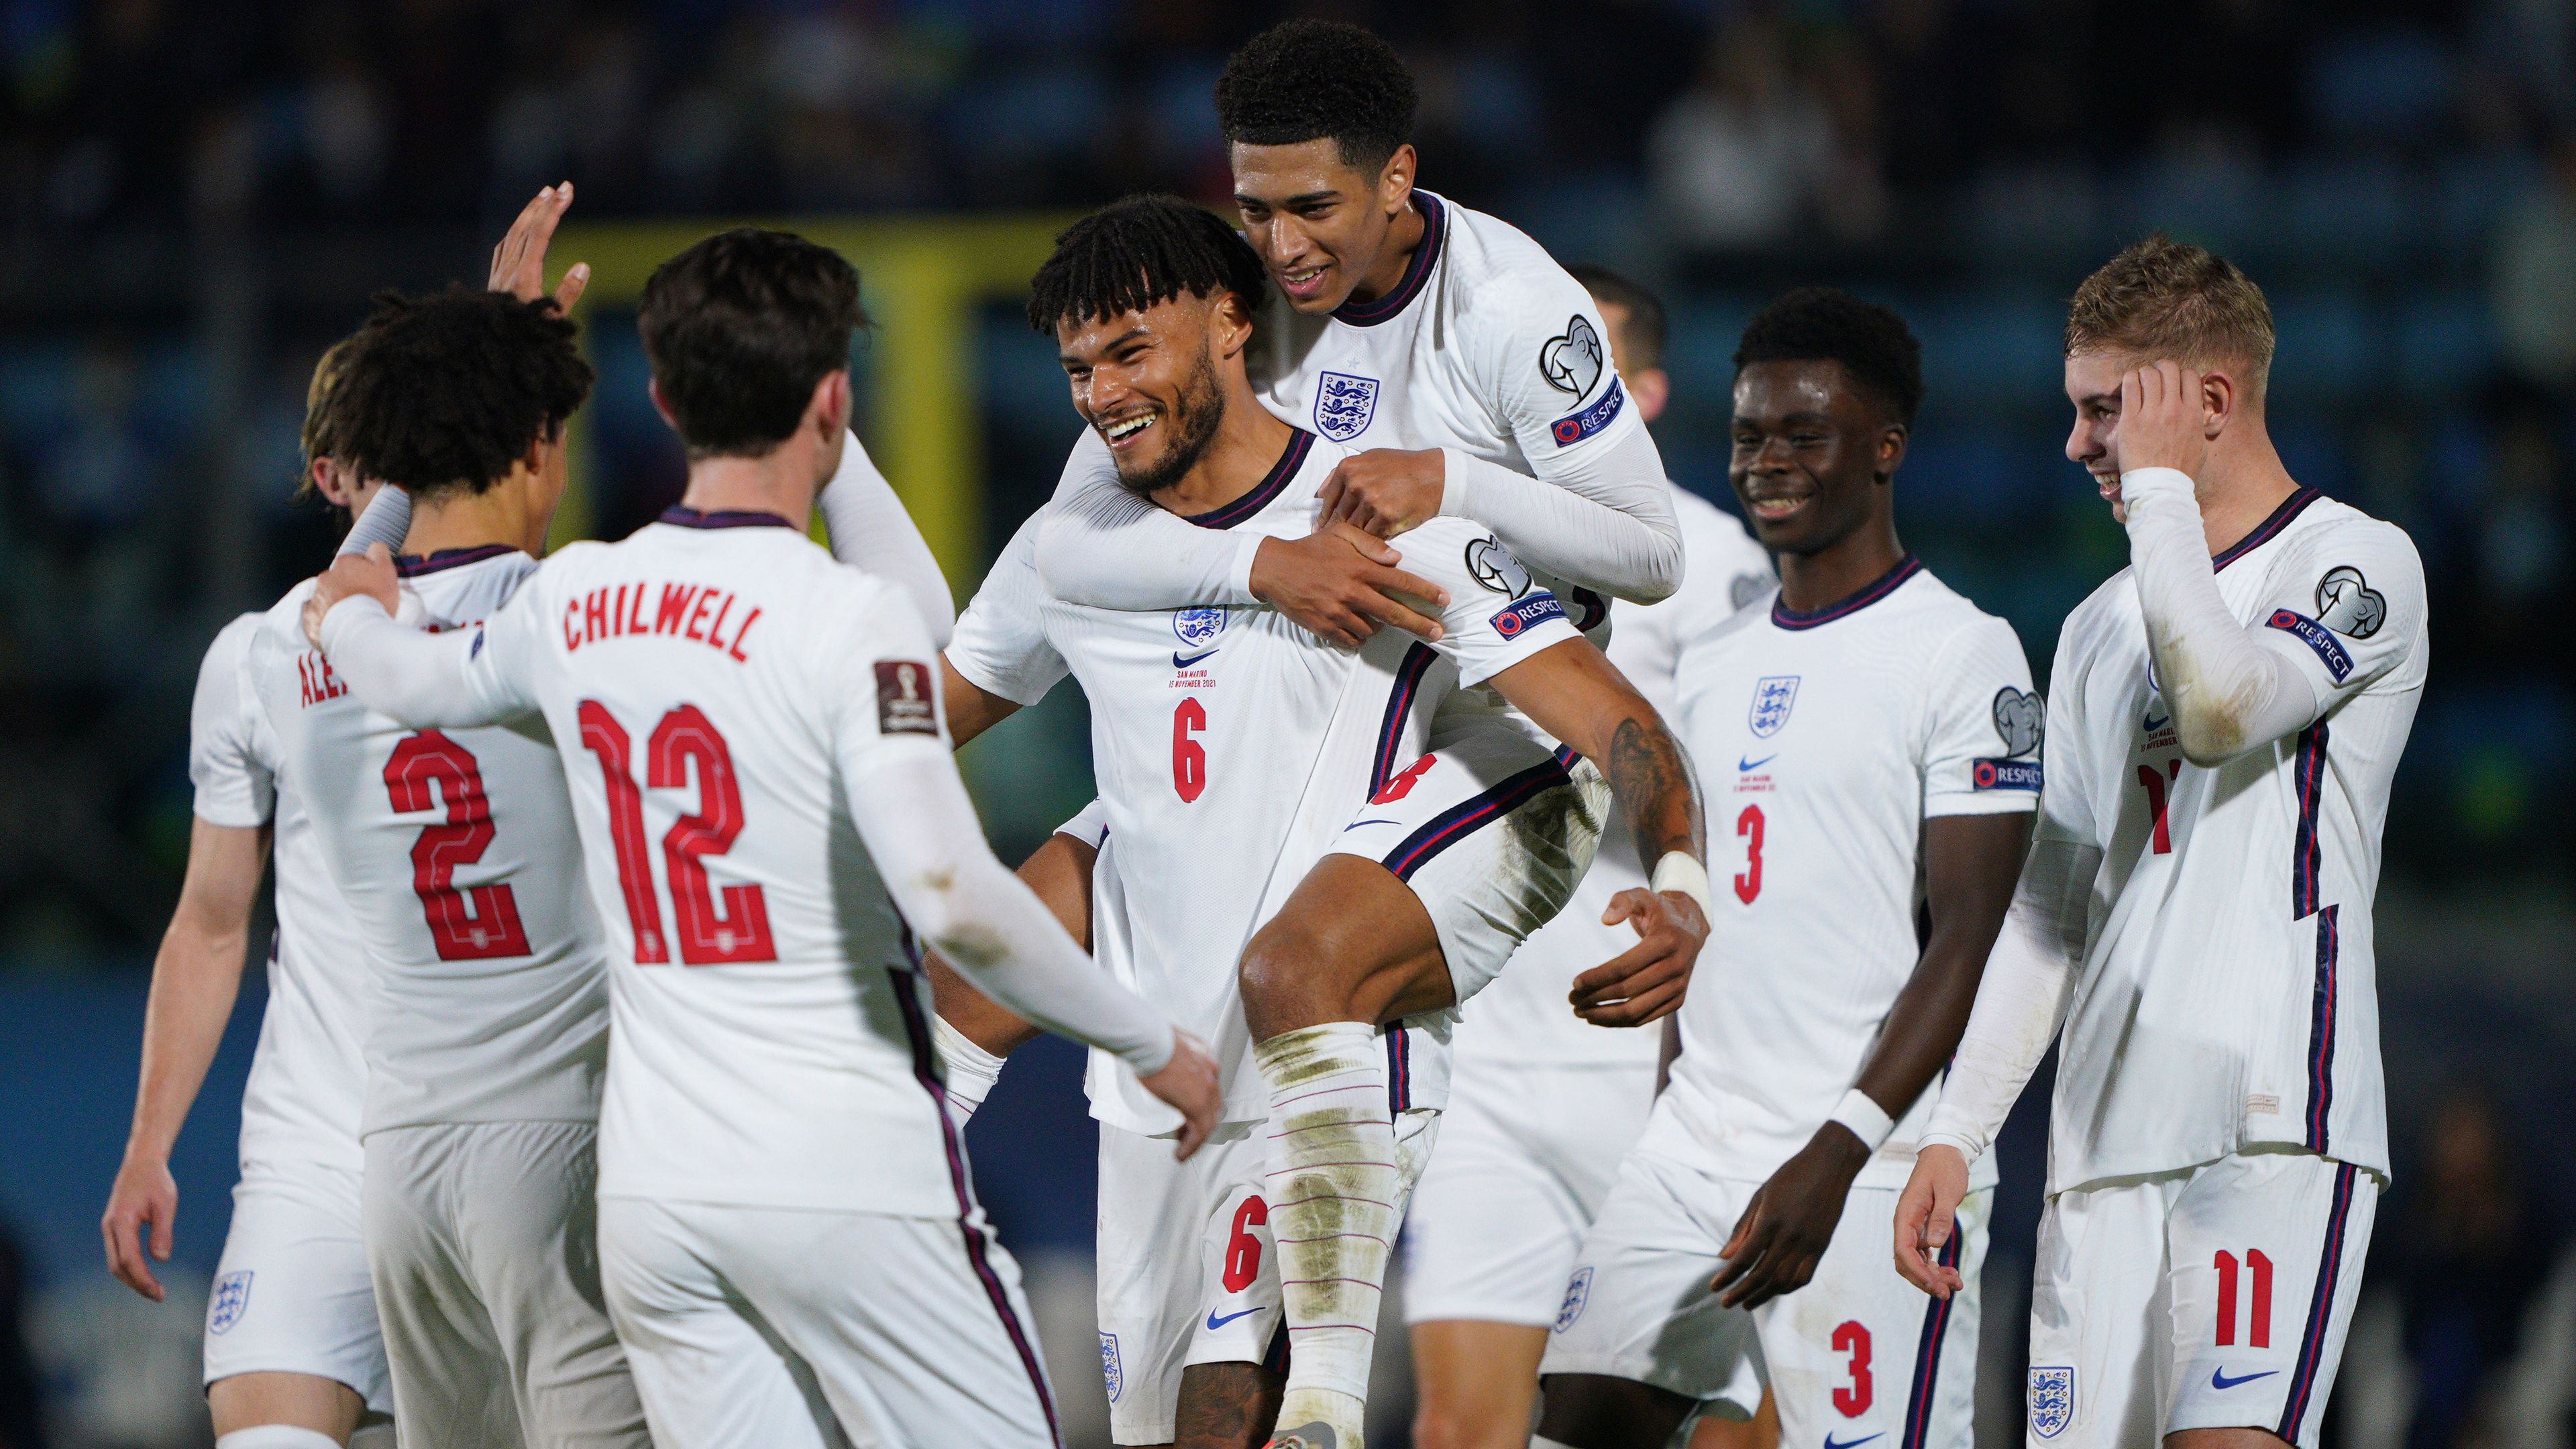 England routs San Marino 10-0, qualifies for World Cup as Michael Owen raises concern